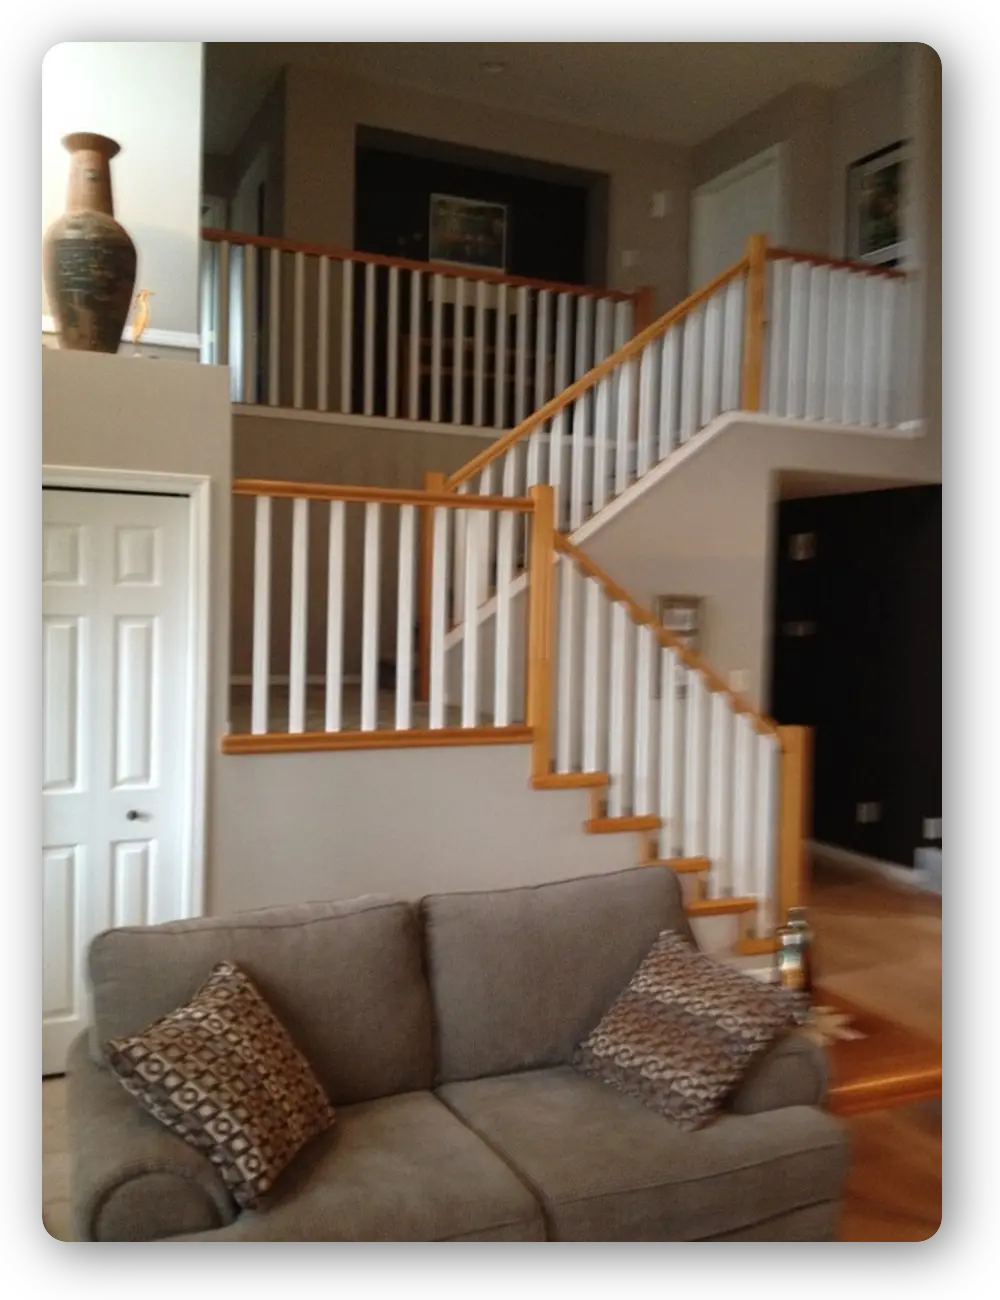 Natural wood railings with painted white spindles